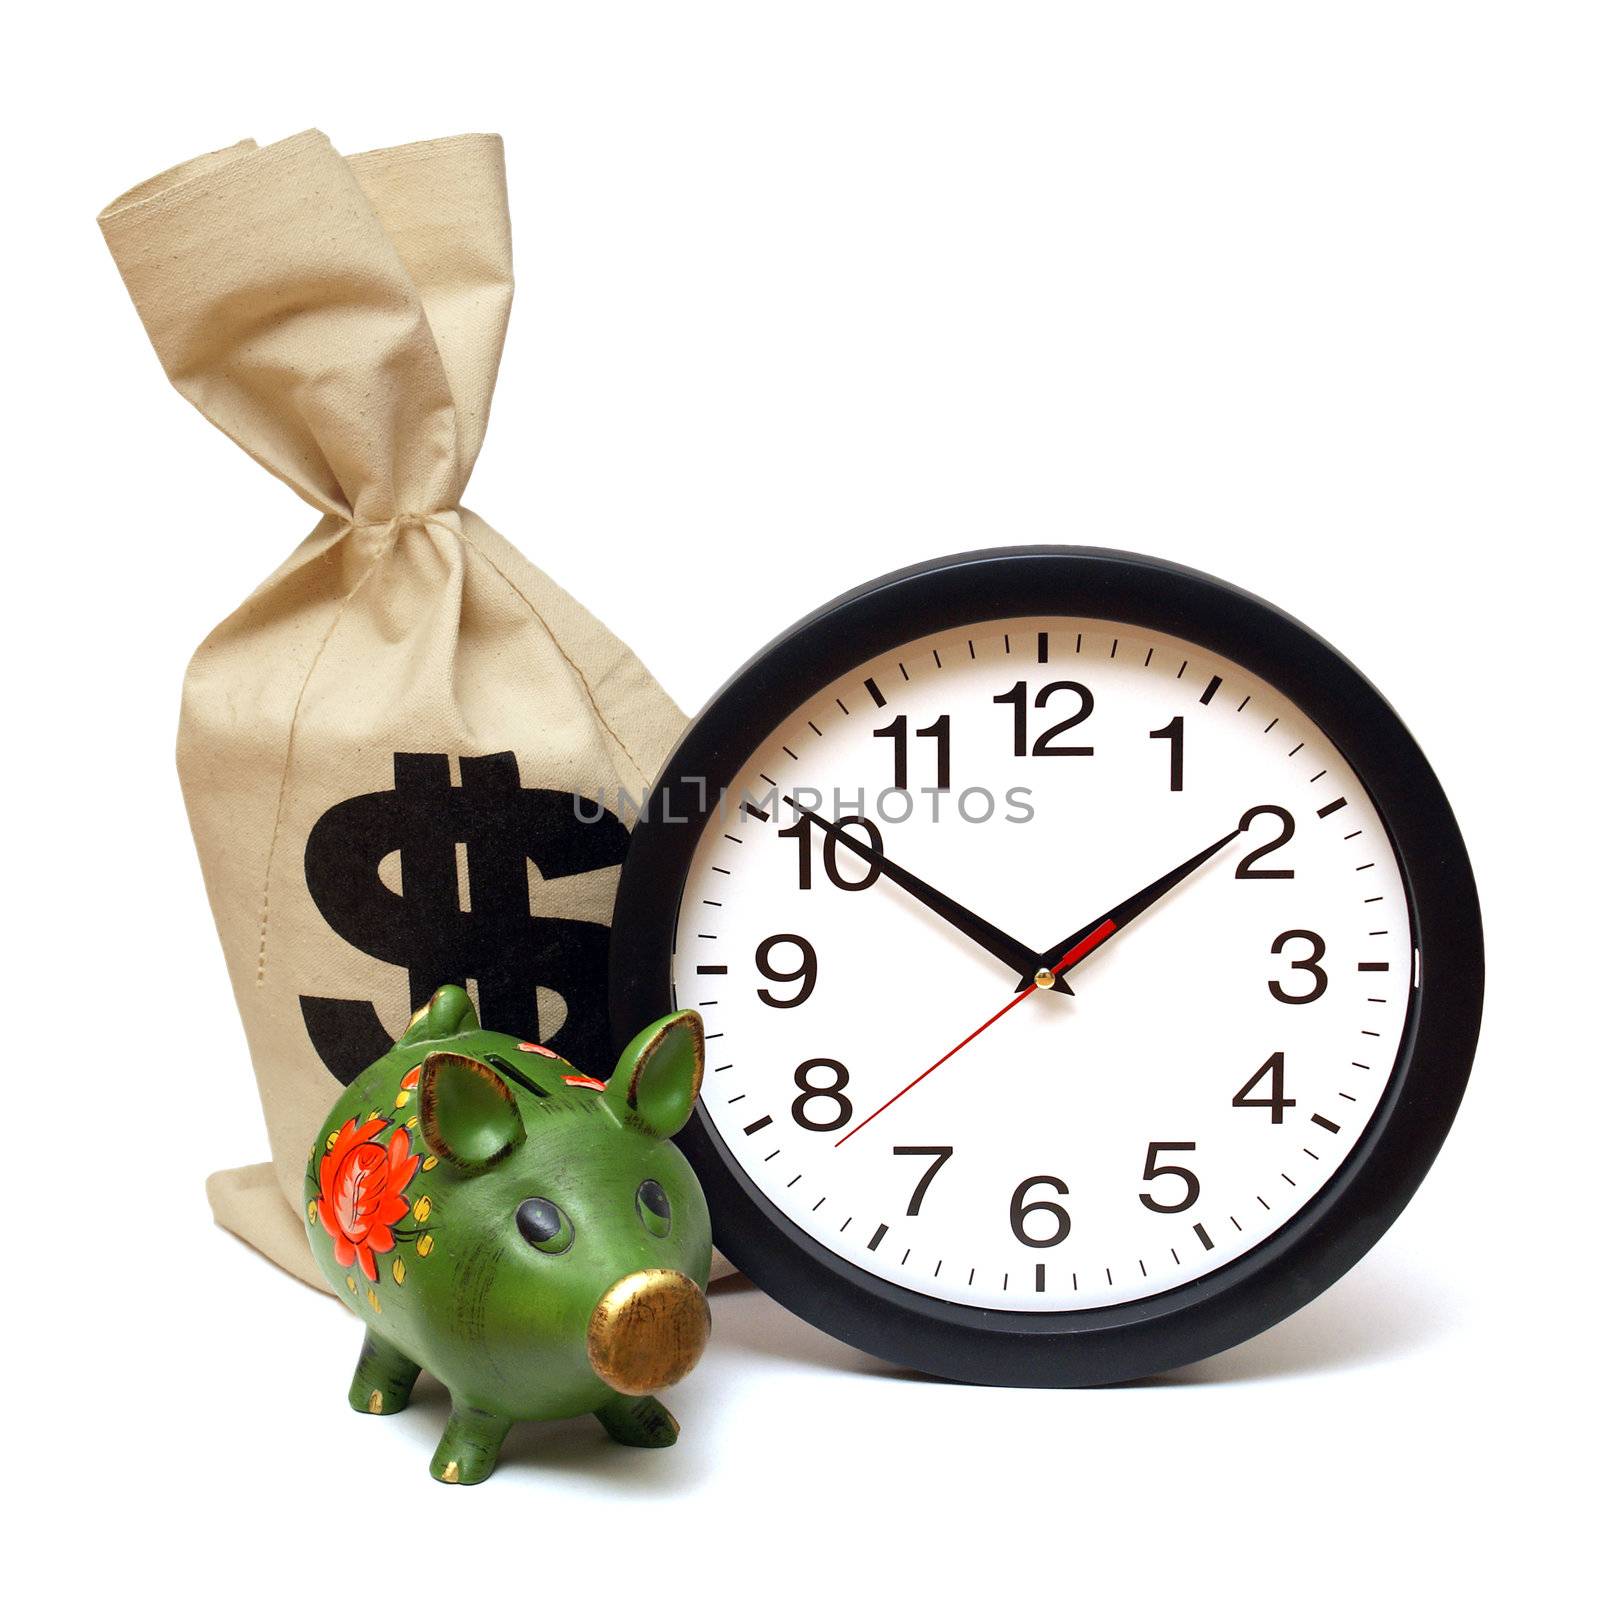 A few items related to the concept that time is money.